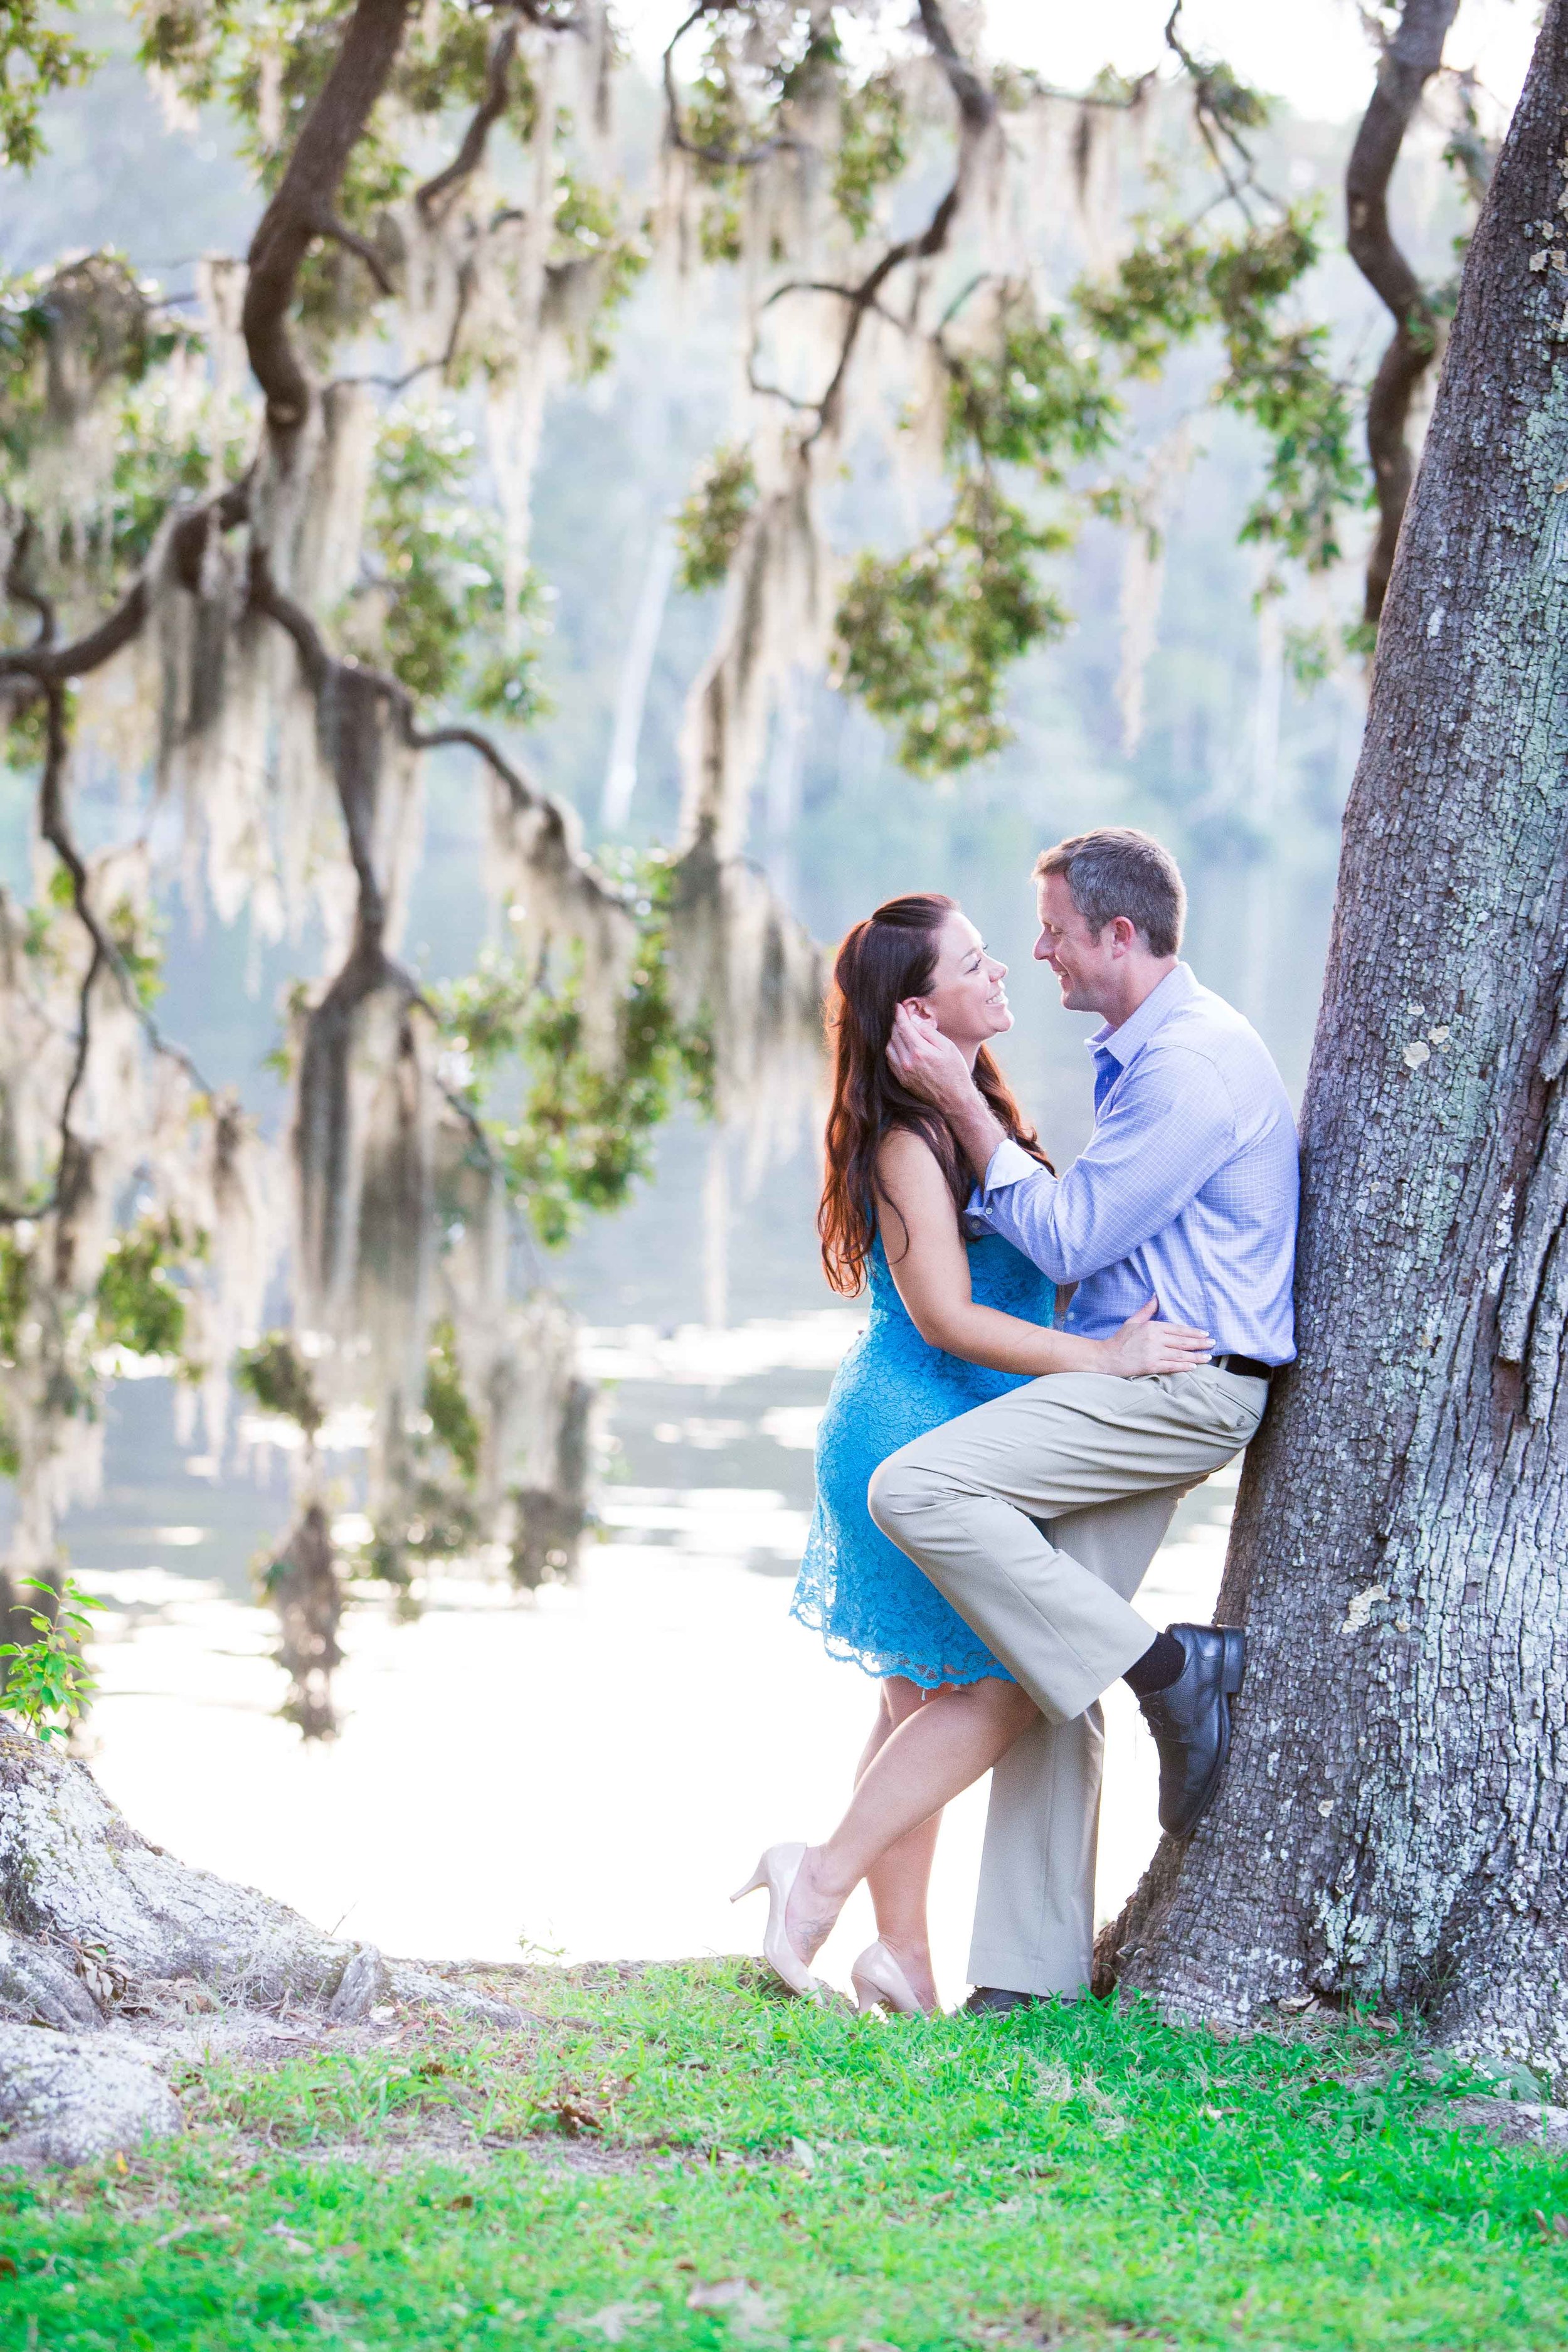 Myrtle beach engagement pictures ramona nicolae photography engagement photos-4.jpg